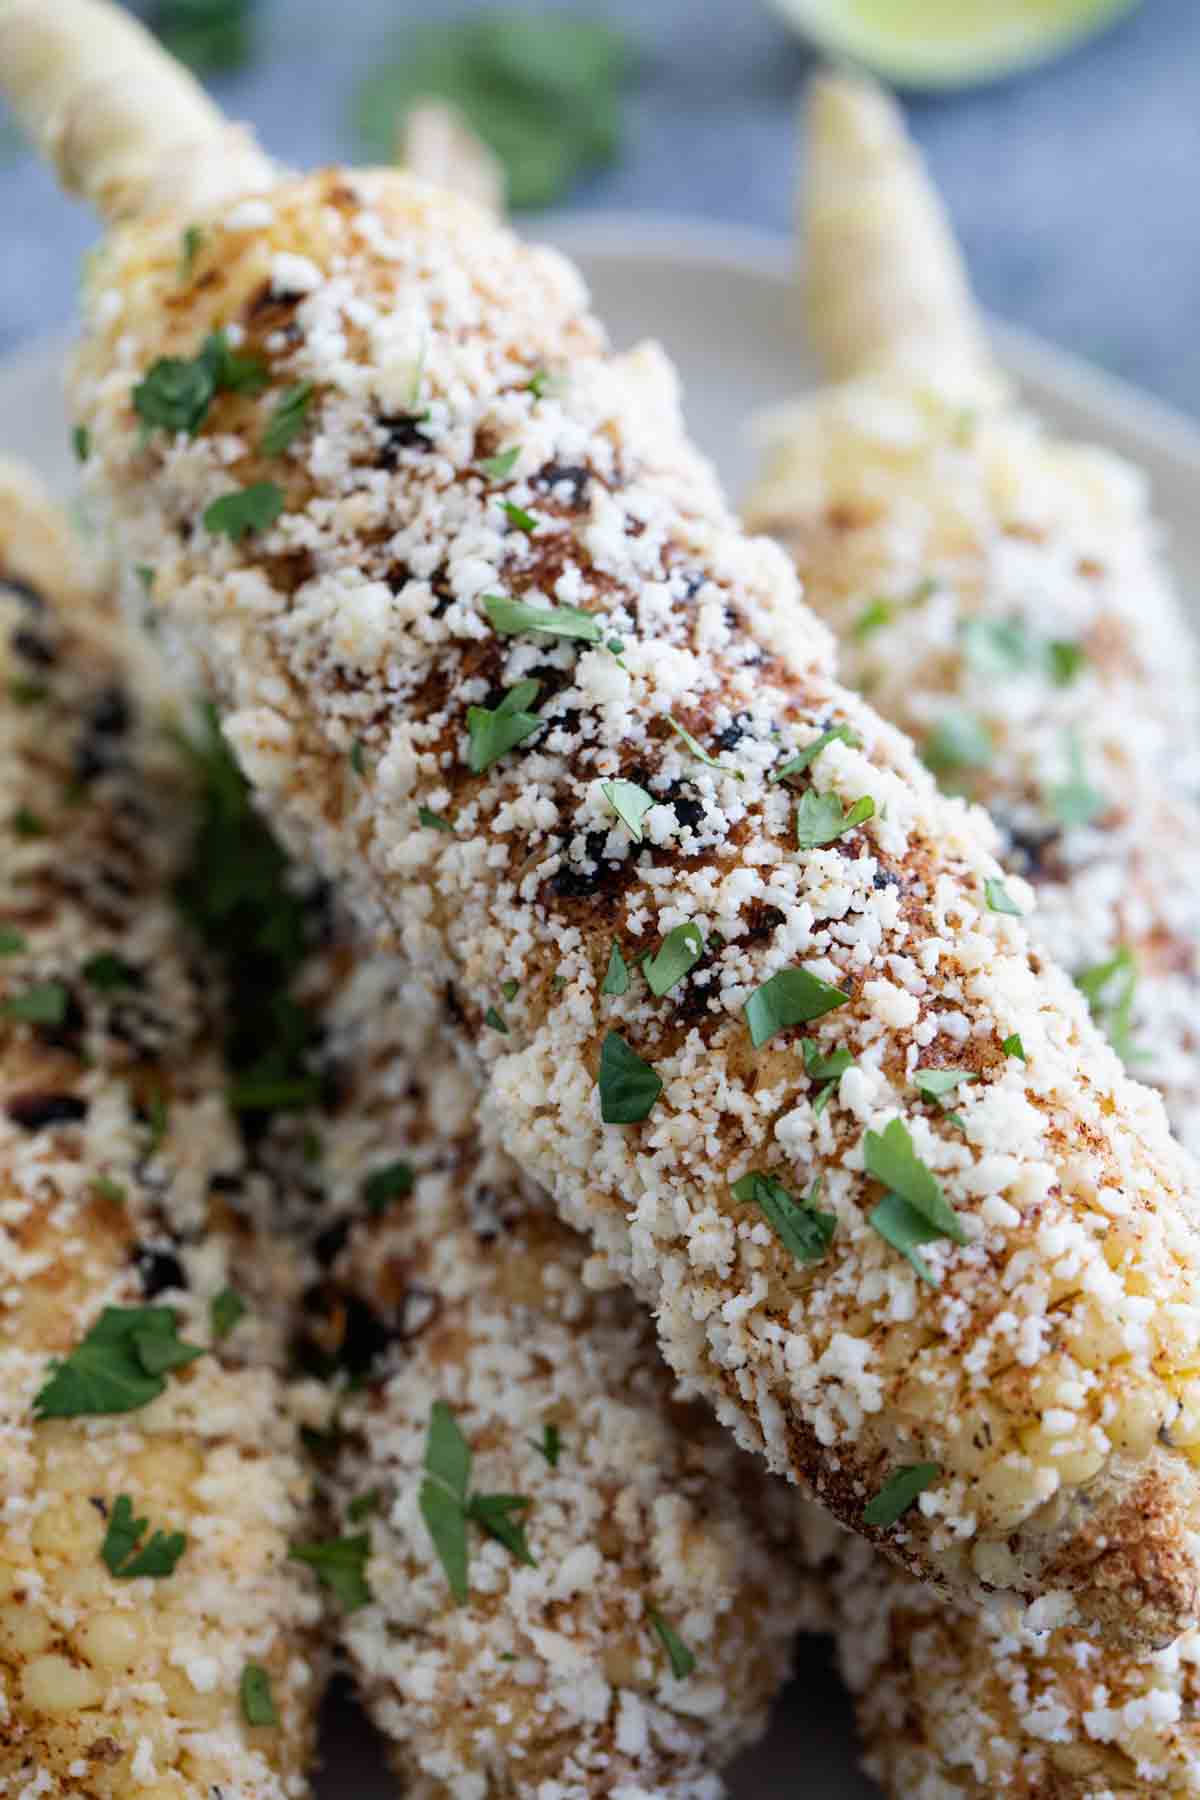 Toppings on grilled Mexican corn on the cob